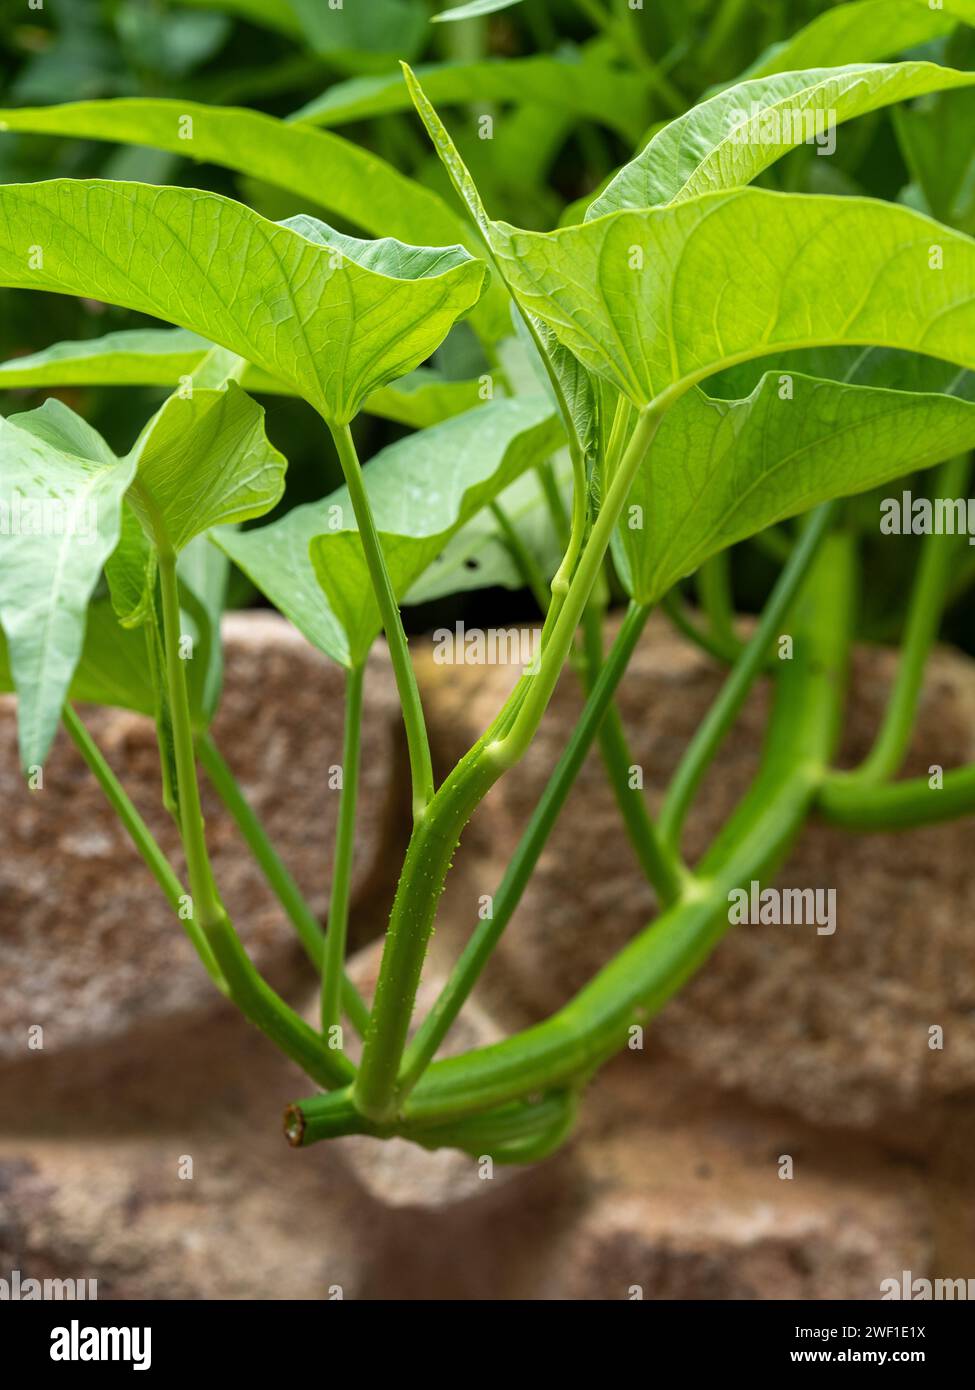 Kangkong Water Spinach, green leaf vegetable, hanging down over a rock wall Stock Photo